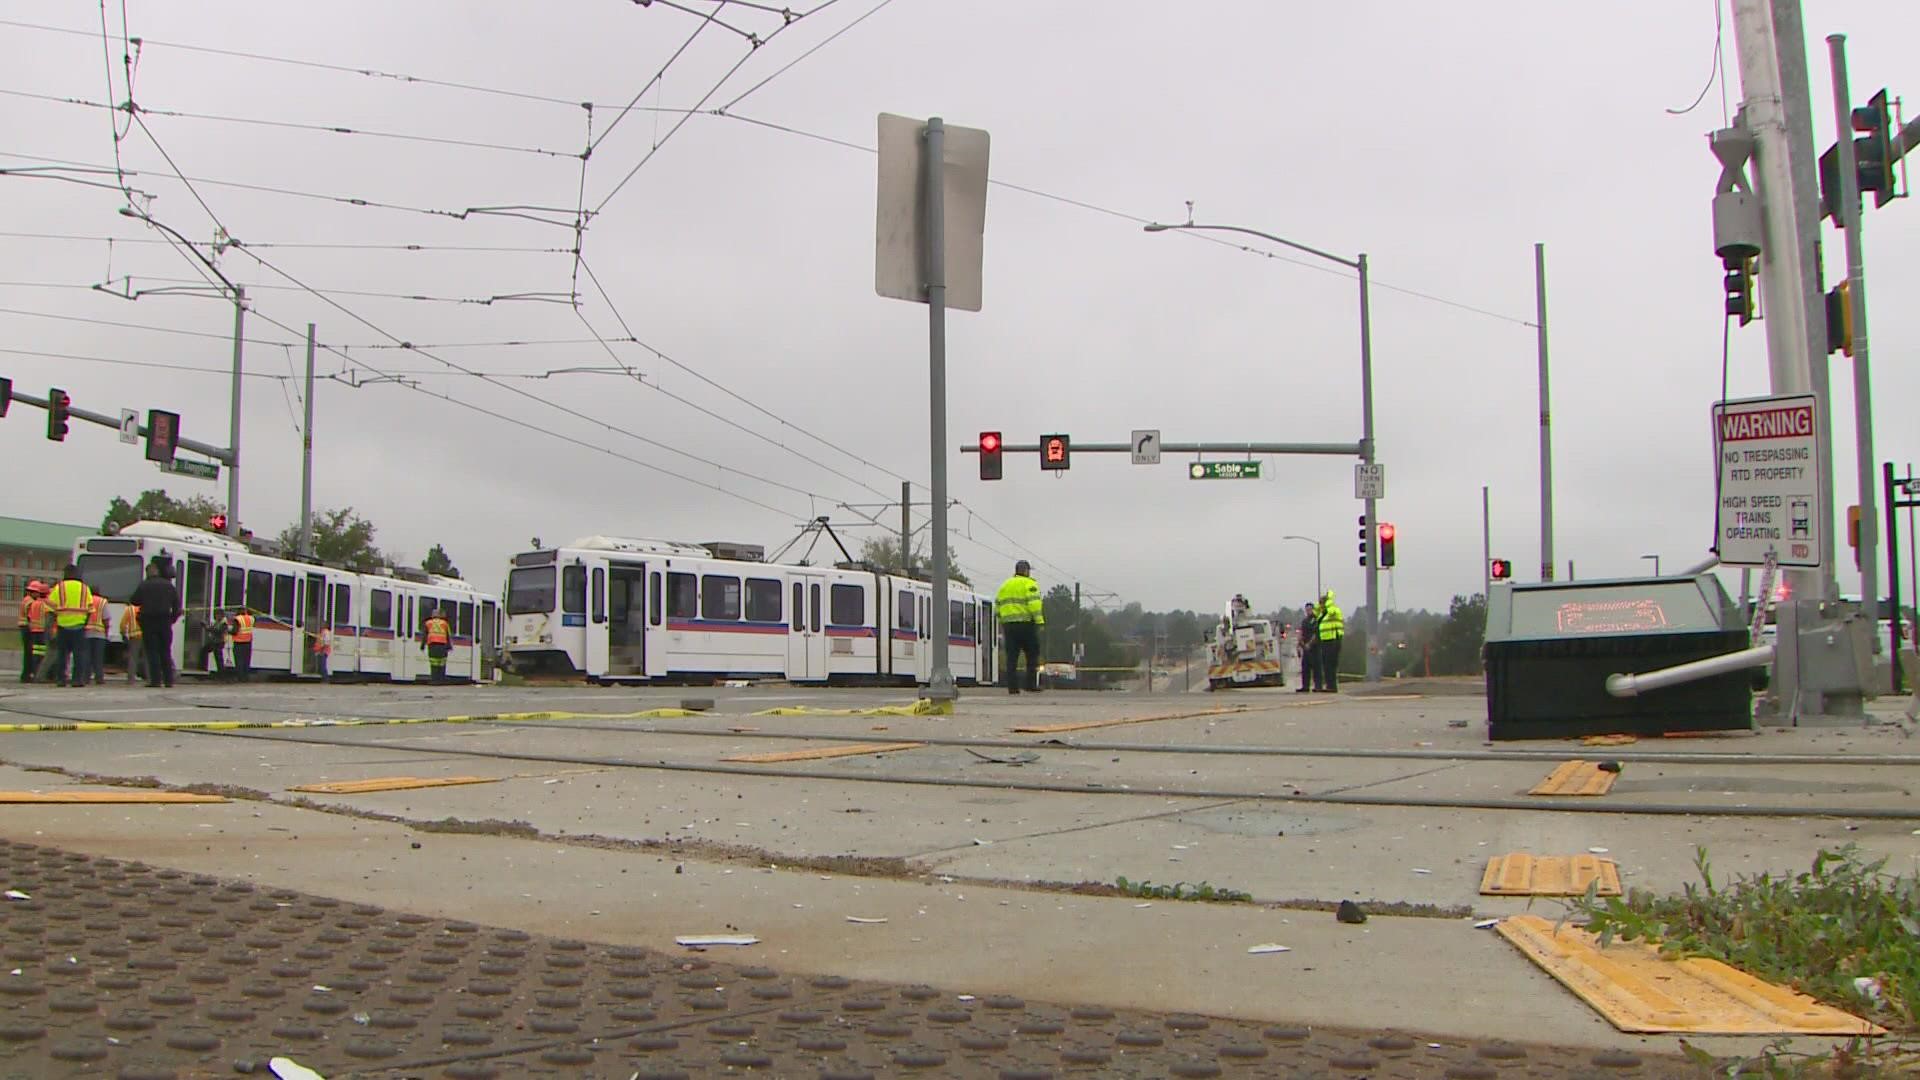 R Line trains in Aurora are limited because of a derailment last month. Now, citing staffing issues, RTD is getting rid of the bus shuttles filling in the gaps.